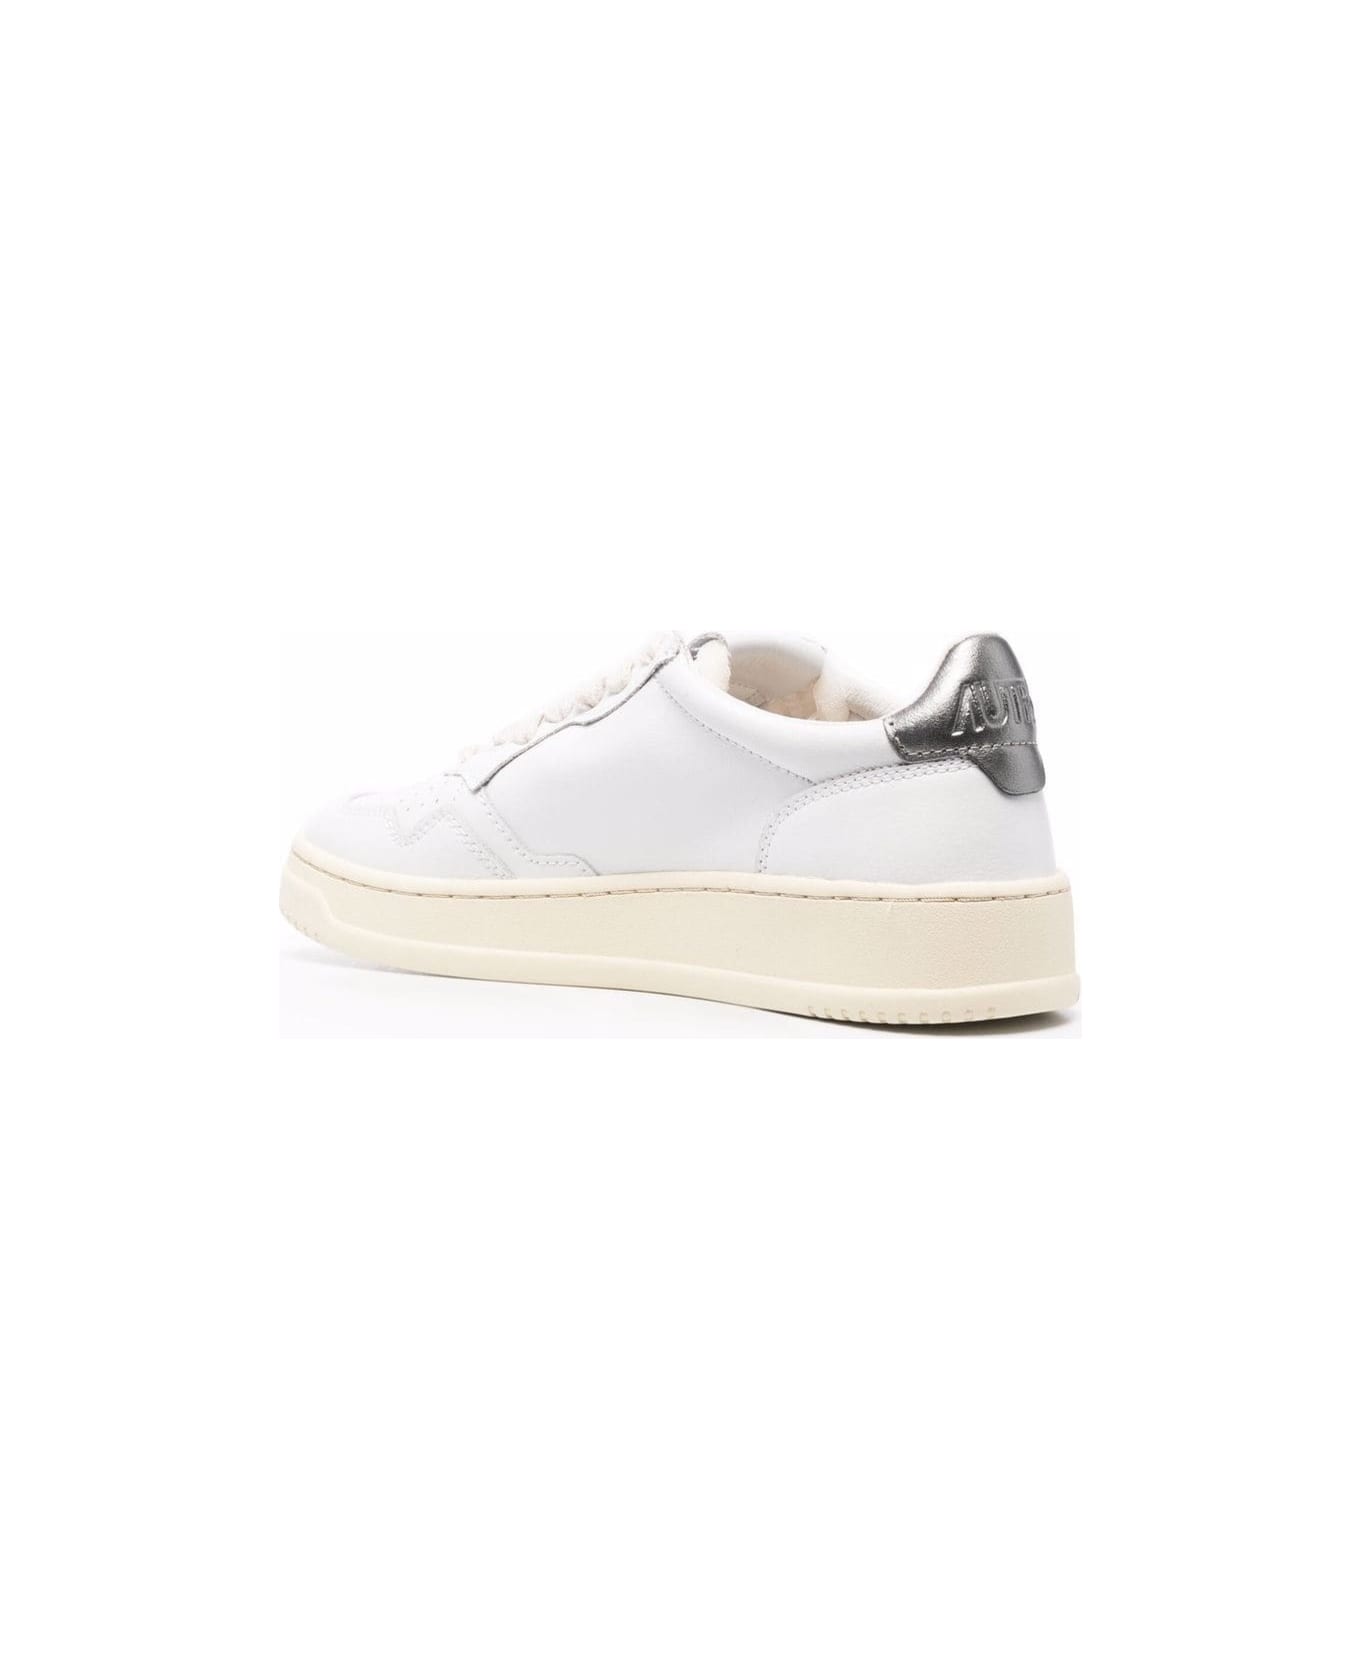 Autry White And Silver Leather Sneakers Autry Woman - Bianco/Argento